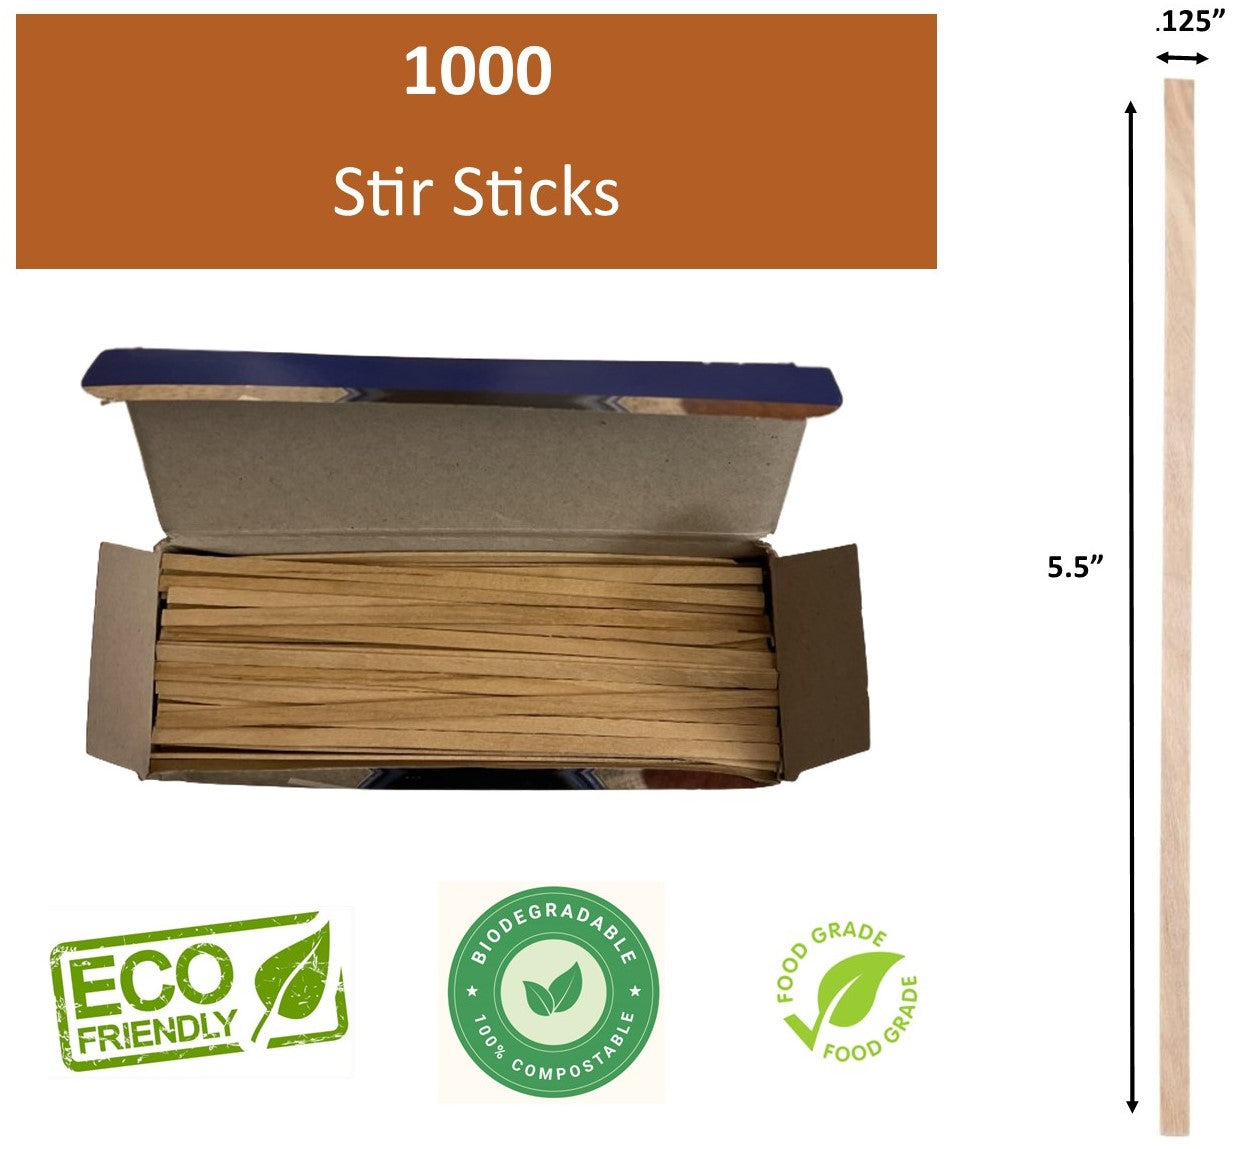 Prestee Wooden Coffee Stirrer, 1000 Disposable Coffee Stir Sticks, 5.5  Wooden Stir Sticks for Coffee & Cocktails, Wooden Beverage Mixer with  Smooth